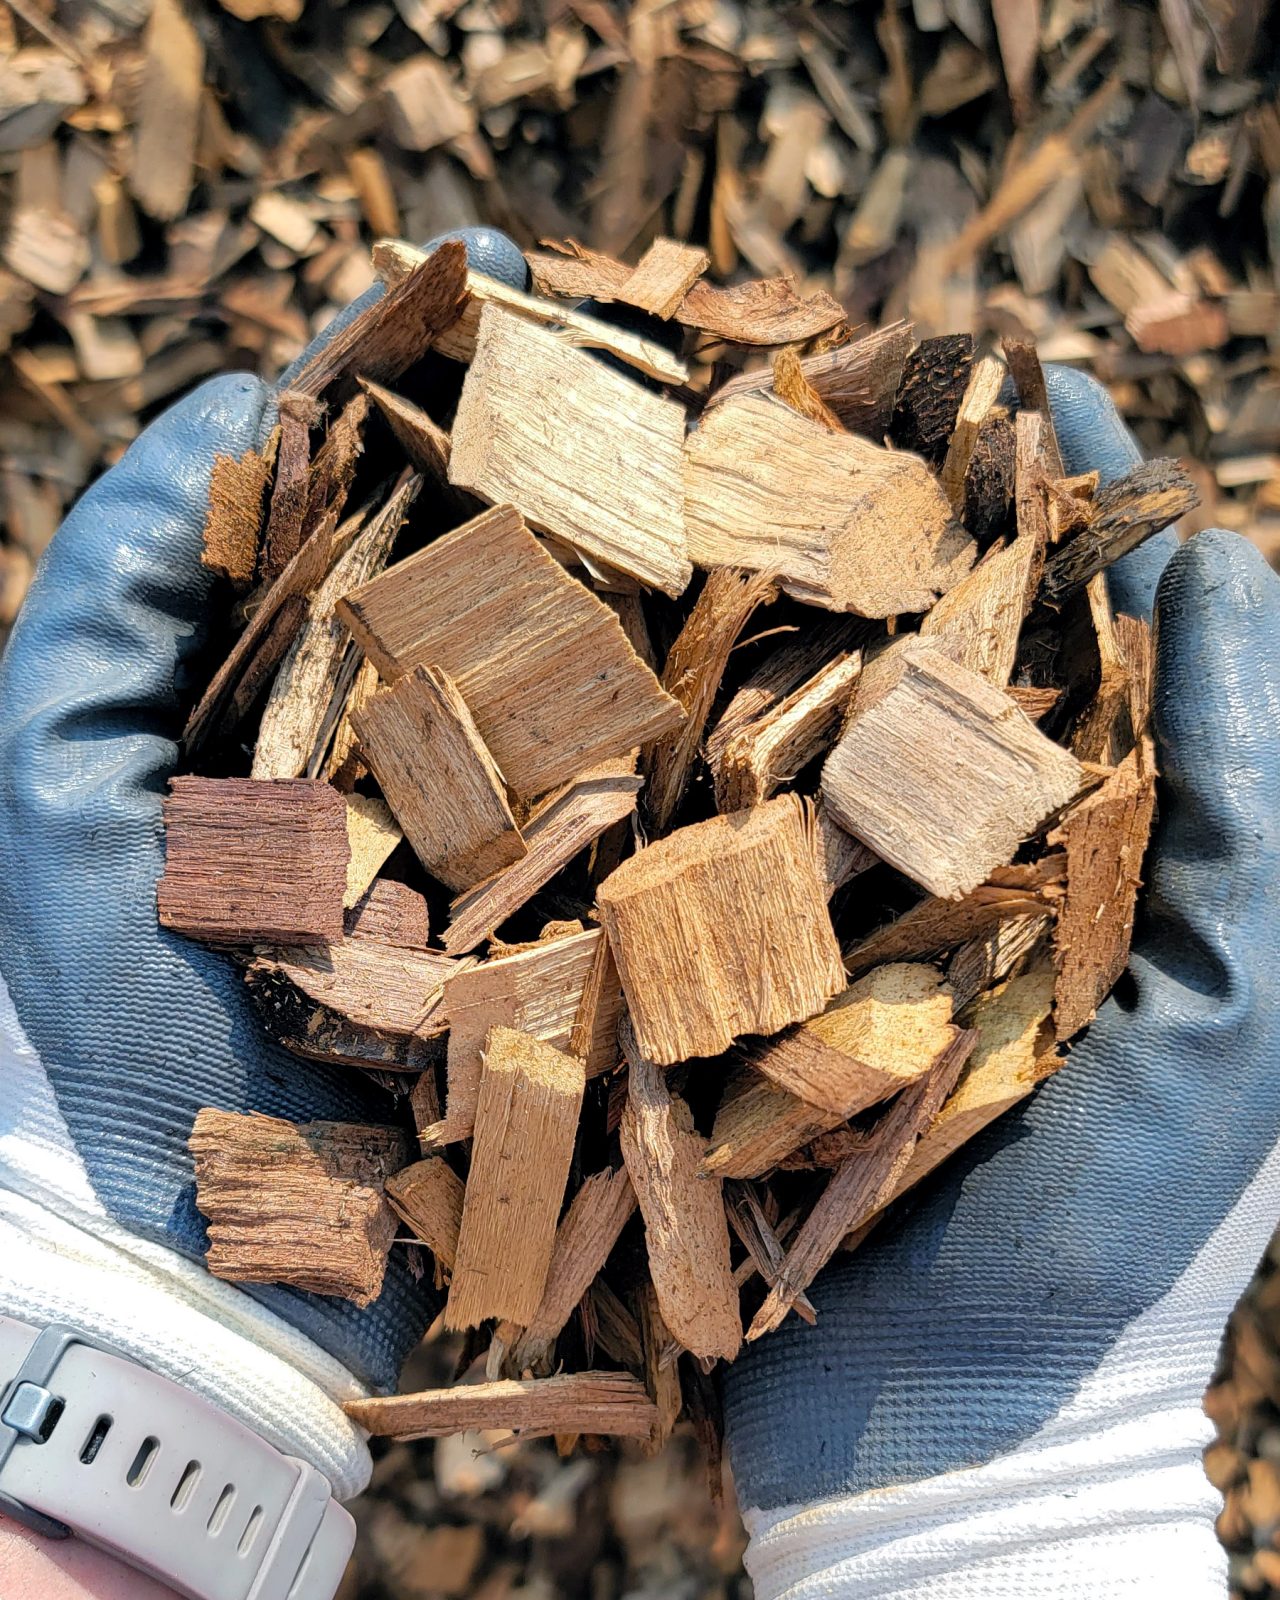 Chips for Sale: Selling Wood Chips After Land Clearing